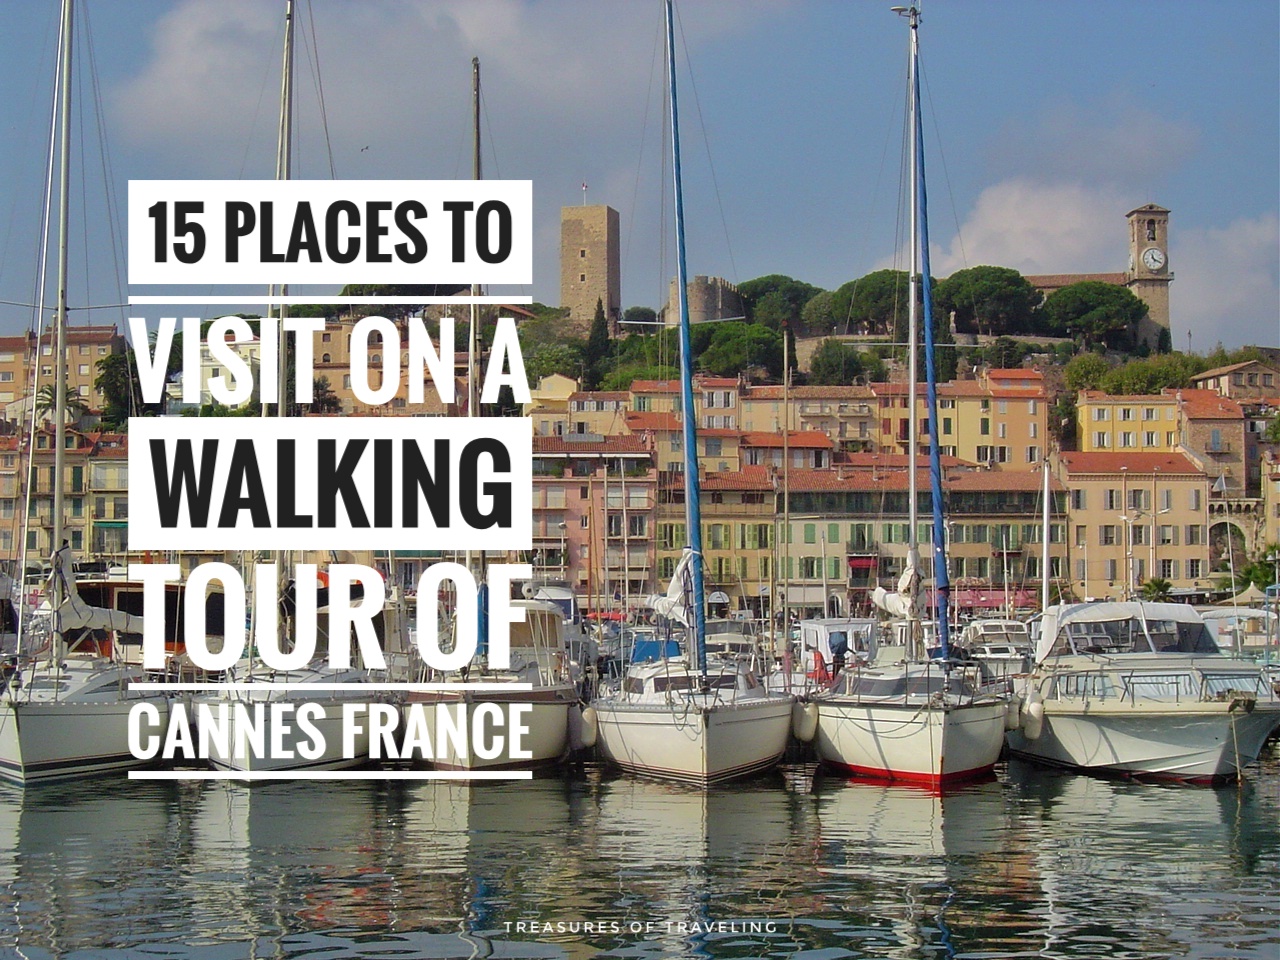 15 Places to Visit on a Walking Tour of Cannes, France